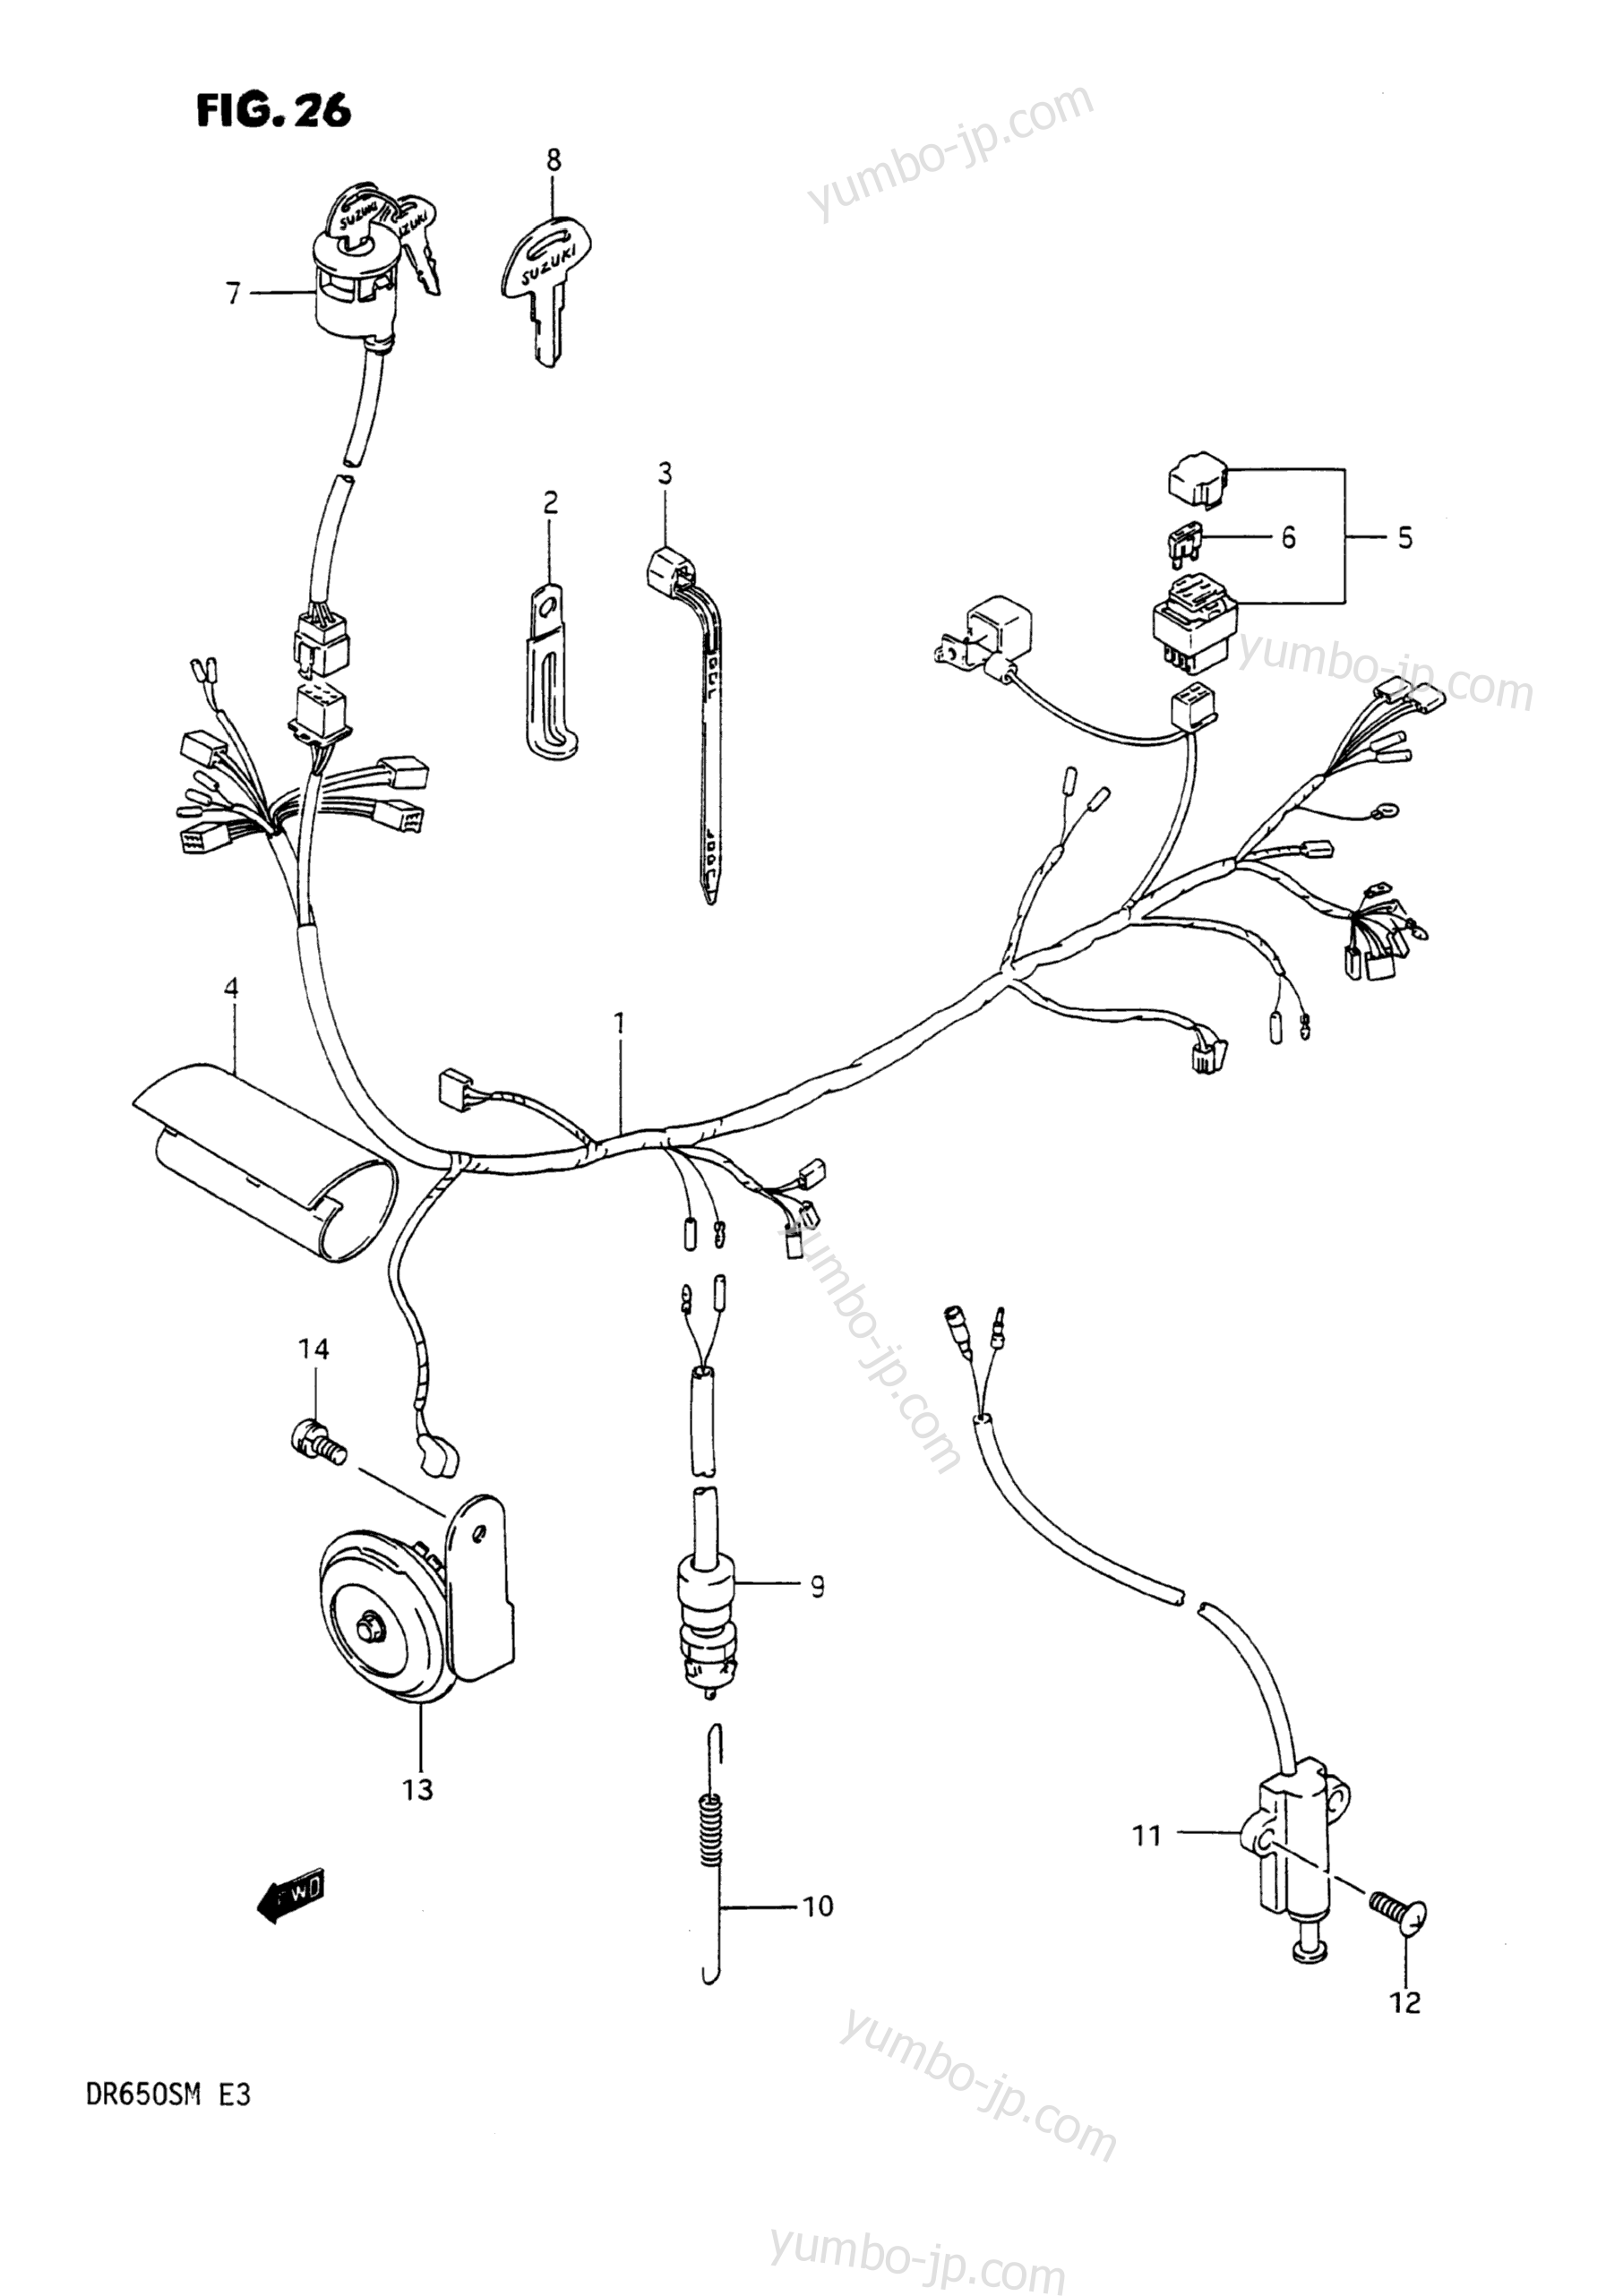 WIRING HARNESS for motorcycles SUZUKI DR650S 1991 year